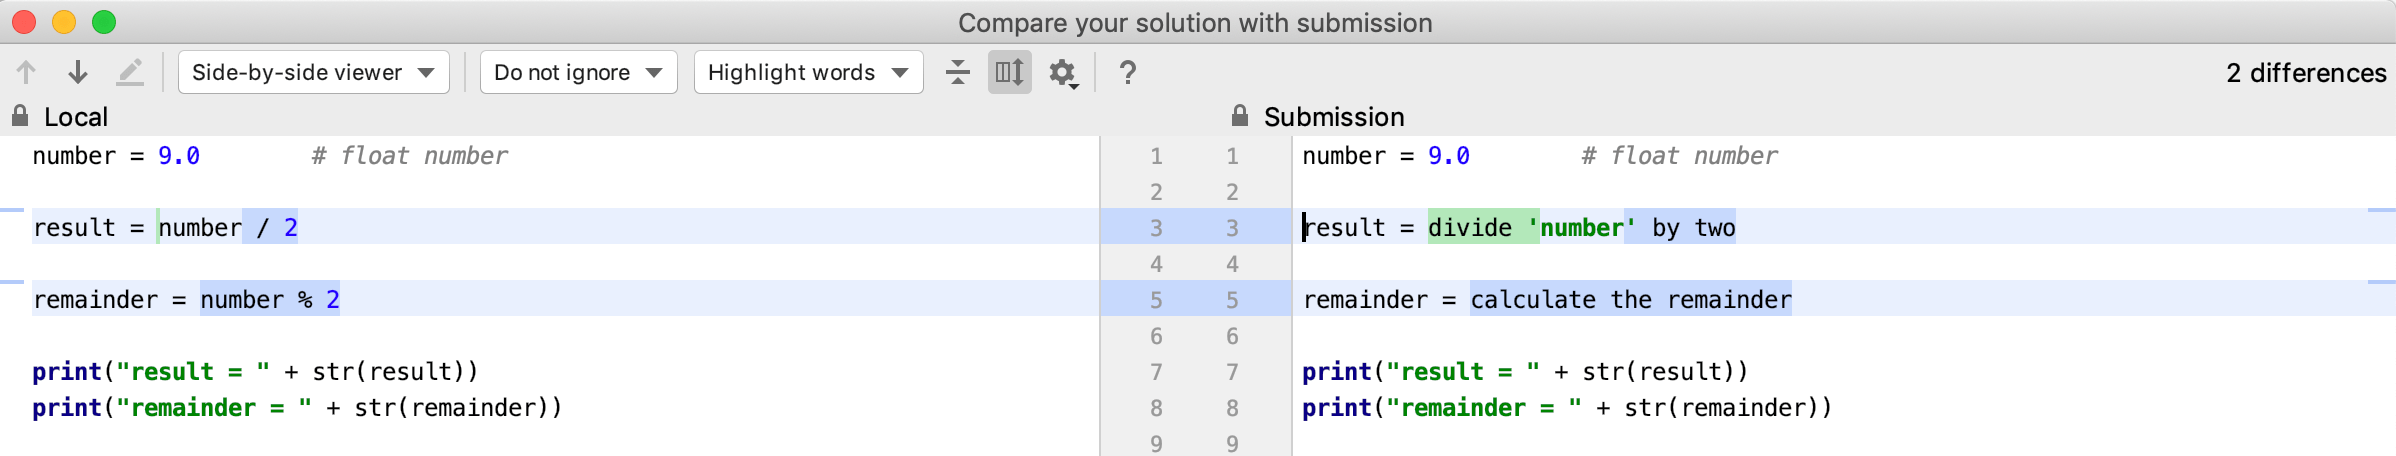 edu submissions diff python intro png